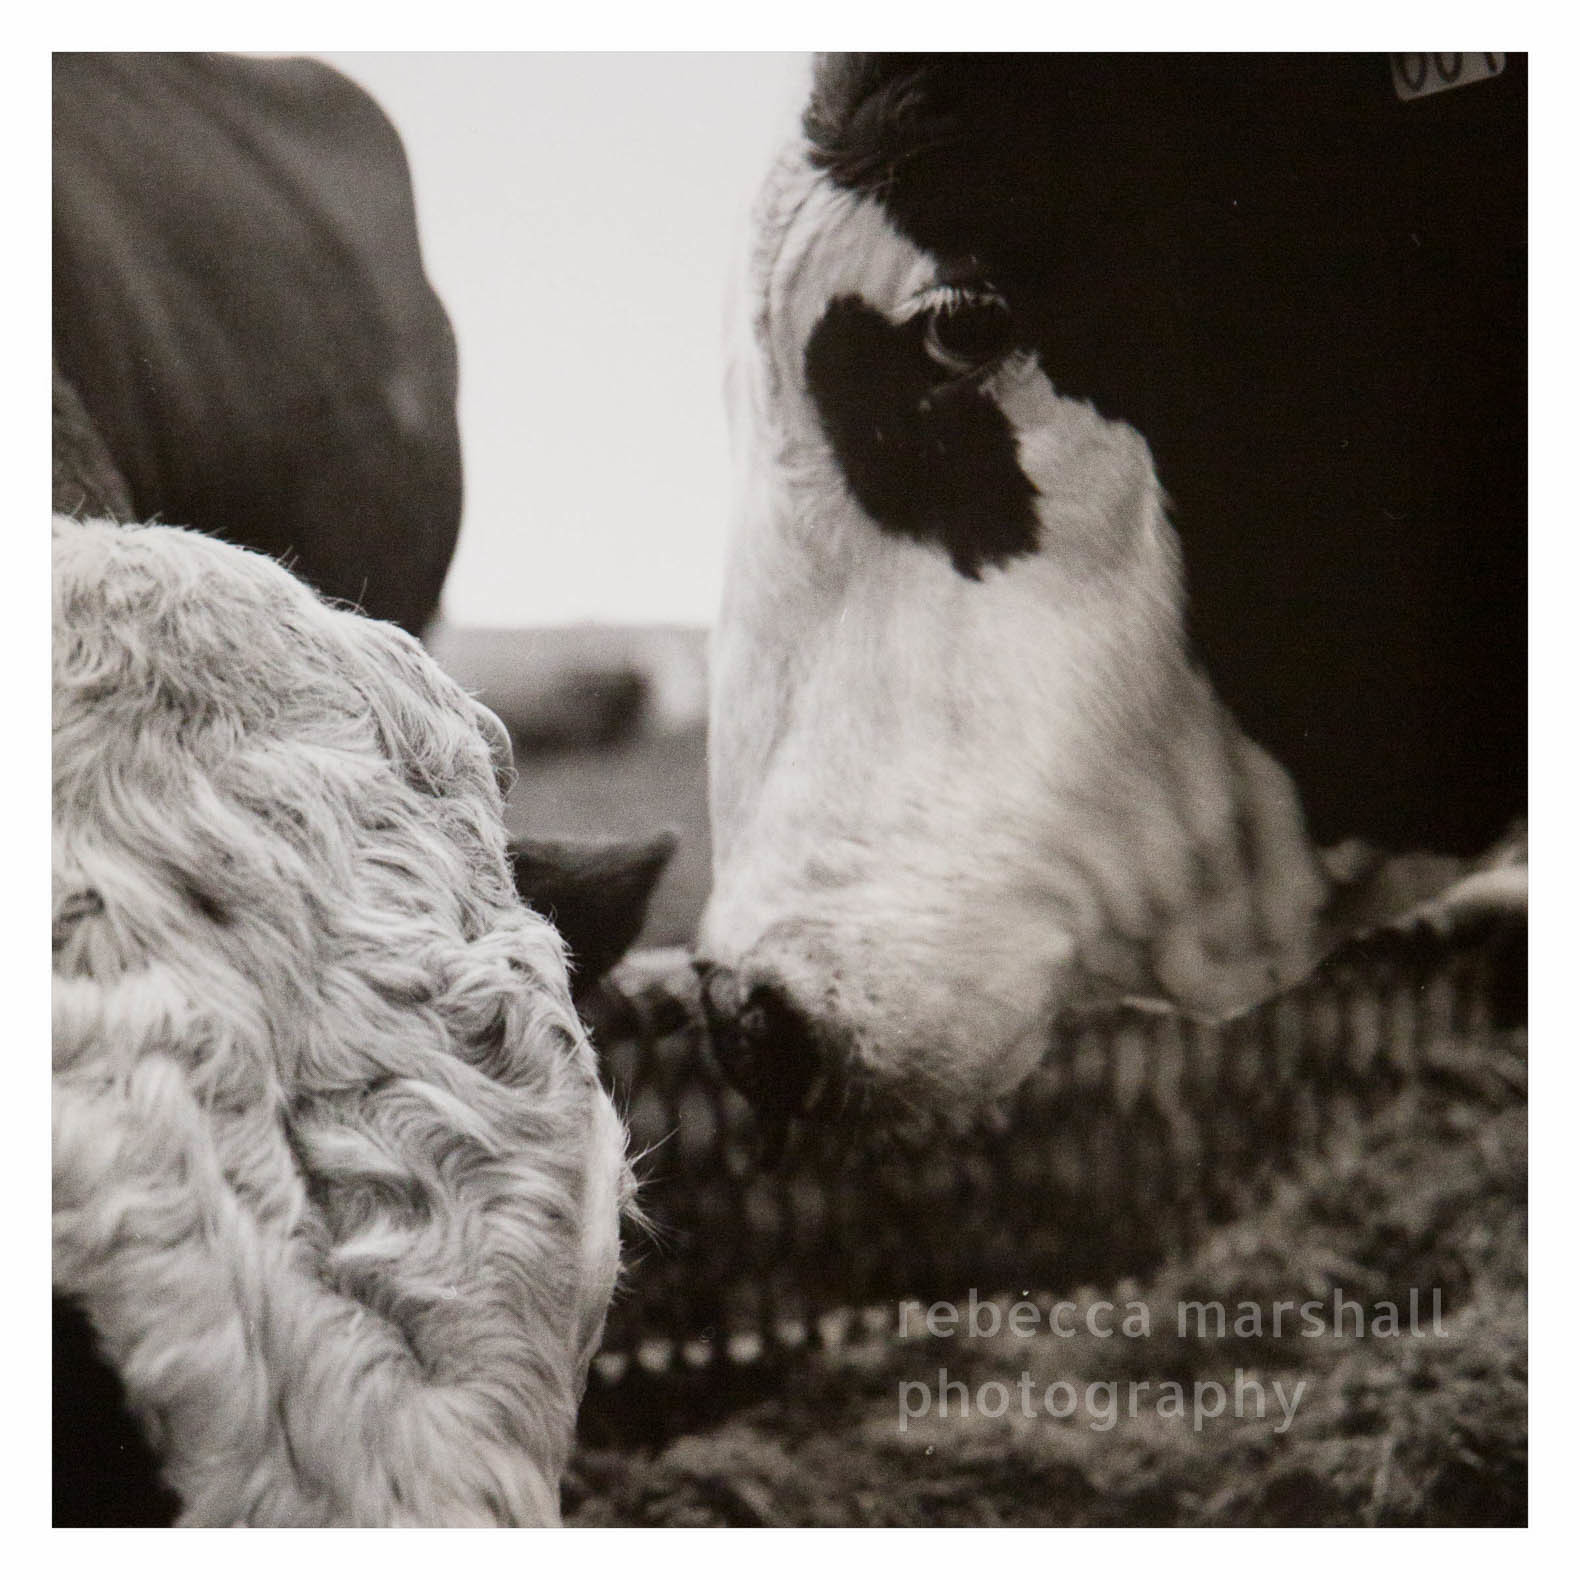 Close-up photograph of black and white cow eating hay